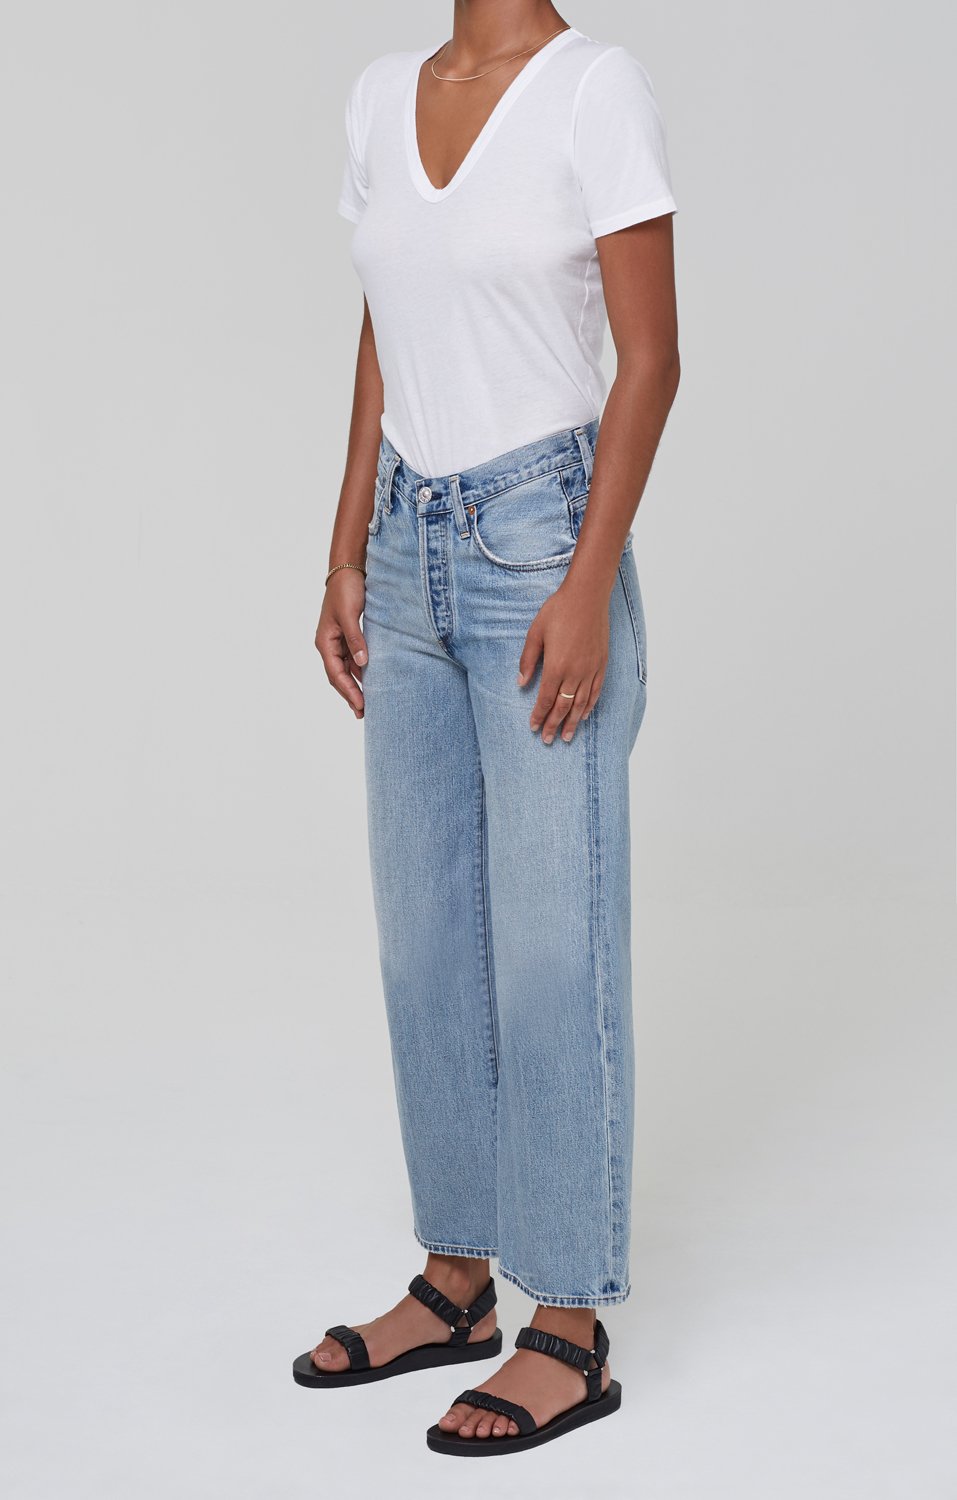 Citizens of Humanity - Elle V-Front Jeans in Issa